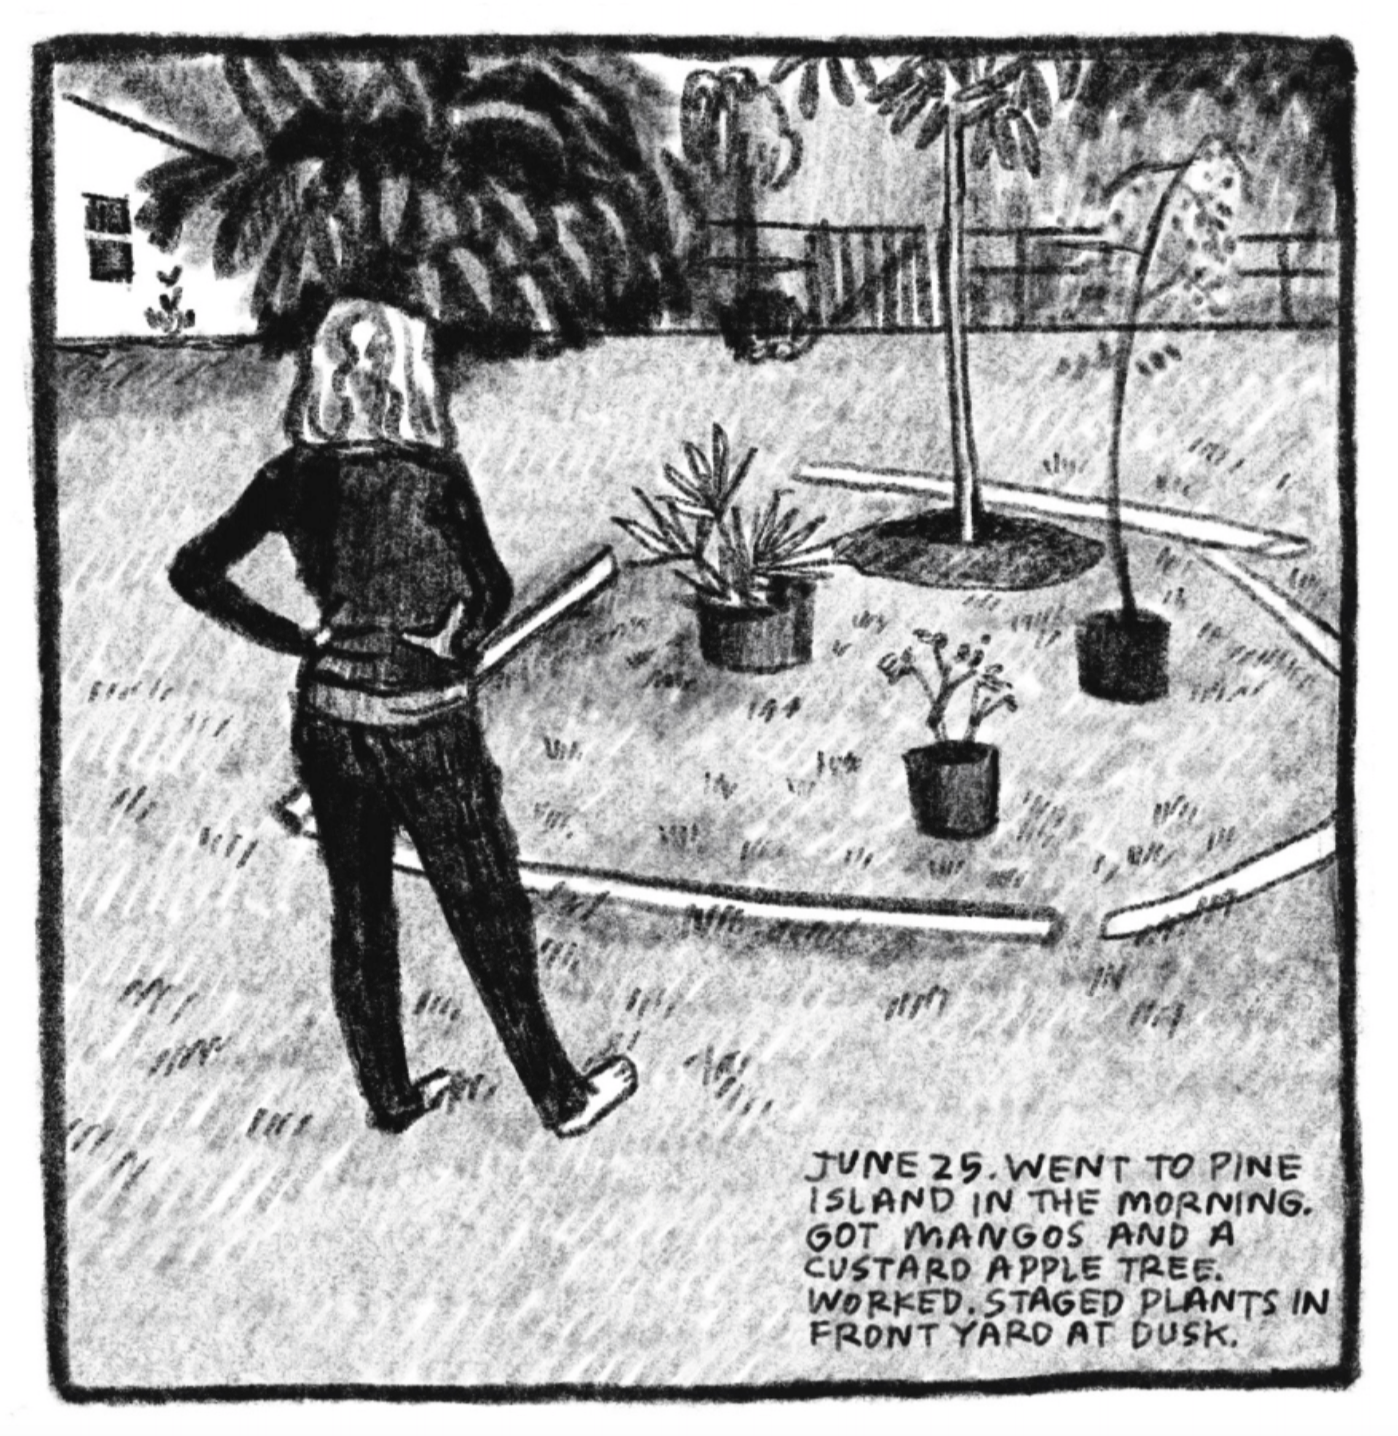 Kim stands, facing away from the reader, with her hands on her hips. She is wearing a black long-sleeve shirt and blank pants. Her feet are bare; she stands in grass. She is outside looking at a plot of a garden, enclosed by five logs. In the plot are two potted plants, a potted young tree and a planted tree. There is a fence in the background, along with other trees and a house. "June 25. Went to Pine Island in the morning. Got mangos and a custard apple tree. Worked. Staged plants in front yard at dusk."